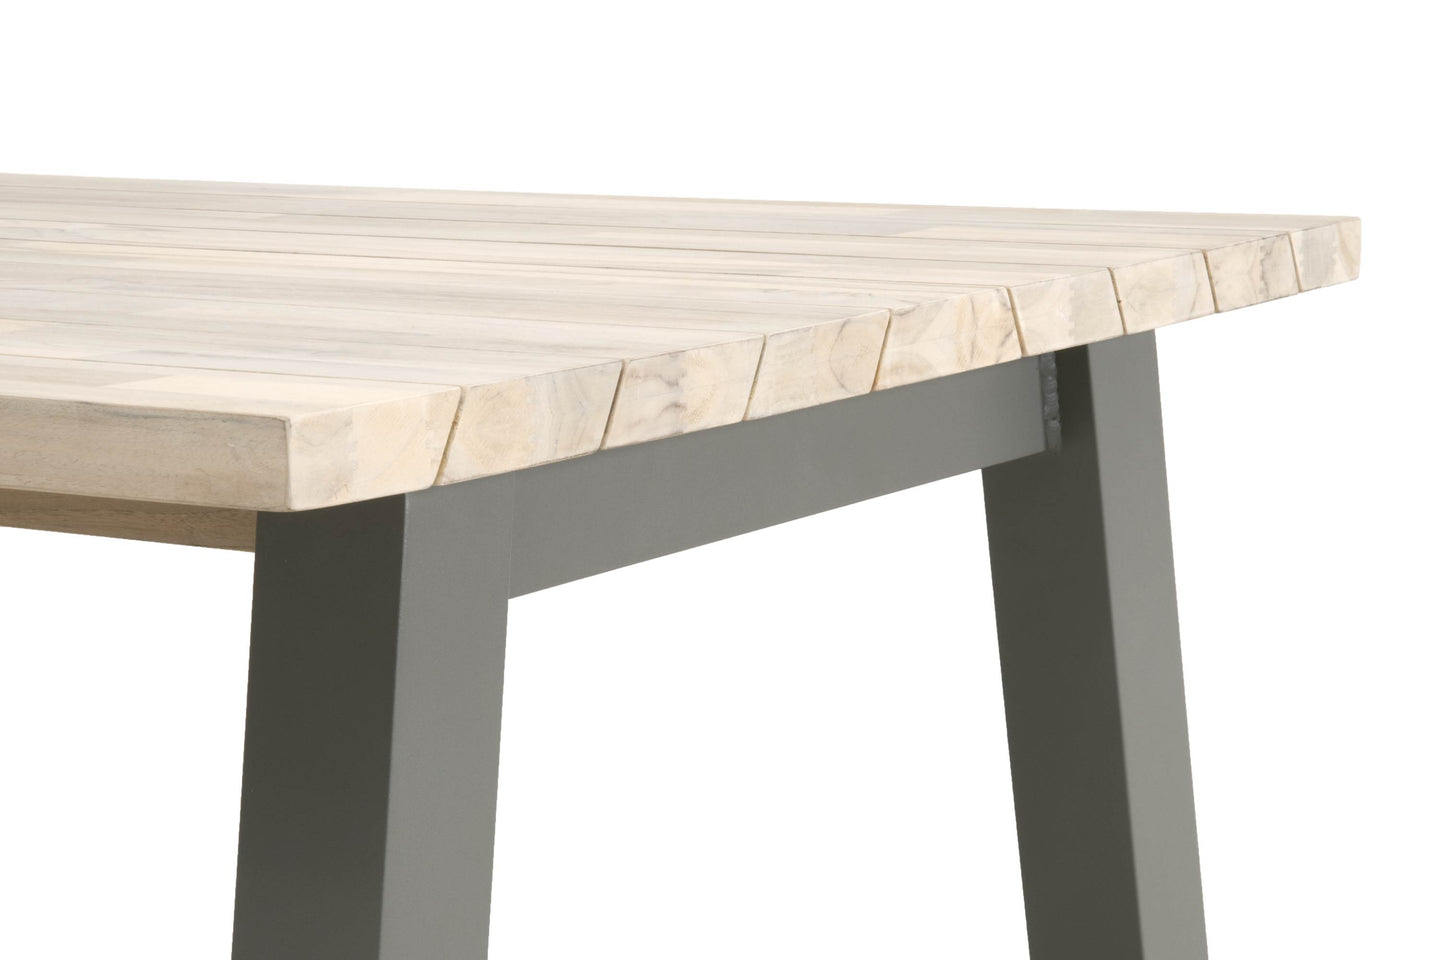 Diego Outdoor Rectangle Dining Table Top